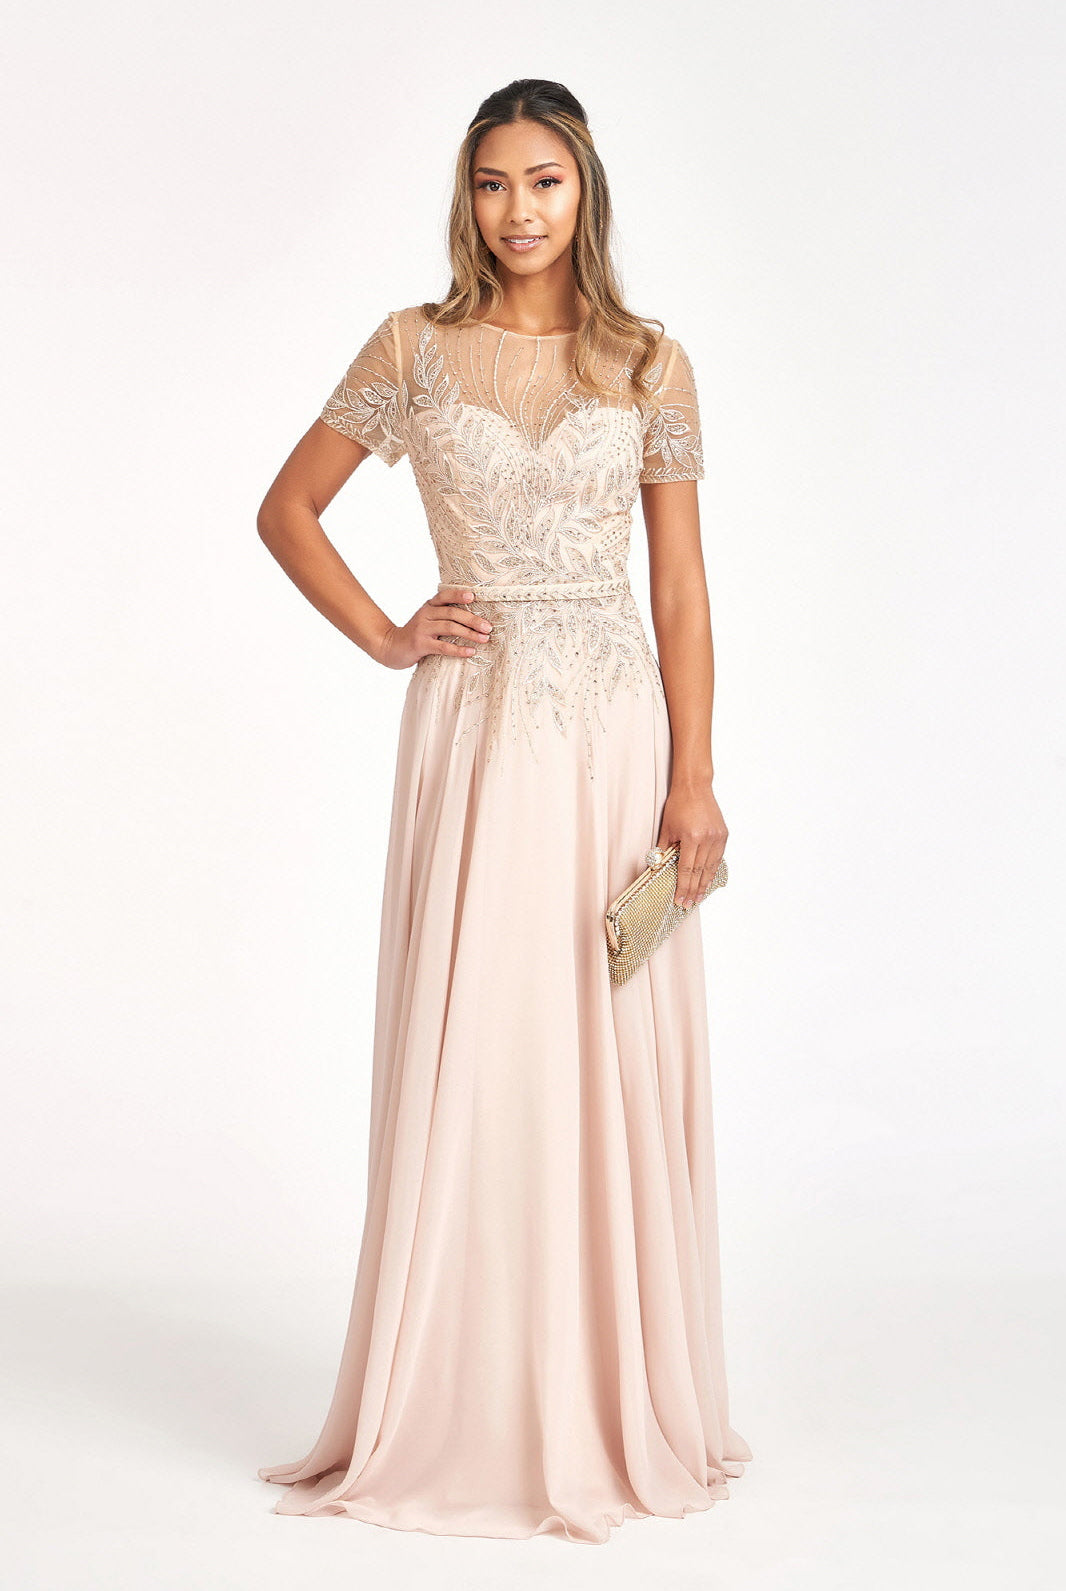 Embroidered Chiffon A-line Dress Short Sleeves and Waistband GLGL3067-MOTHER OF BRIDE-smcfashion.com